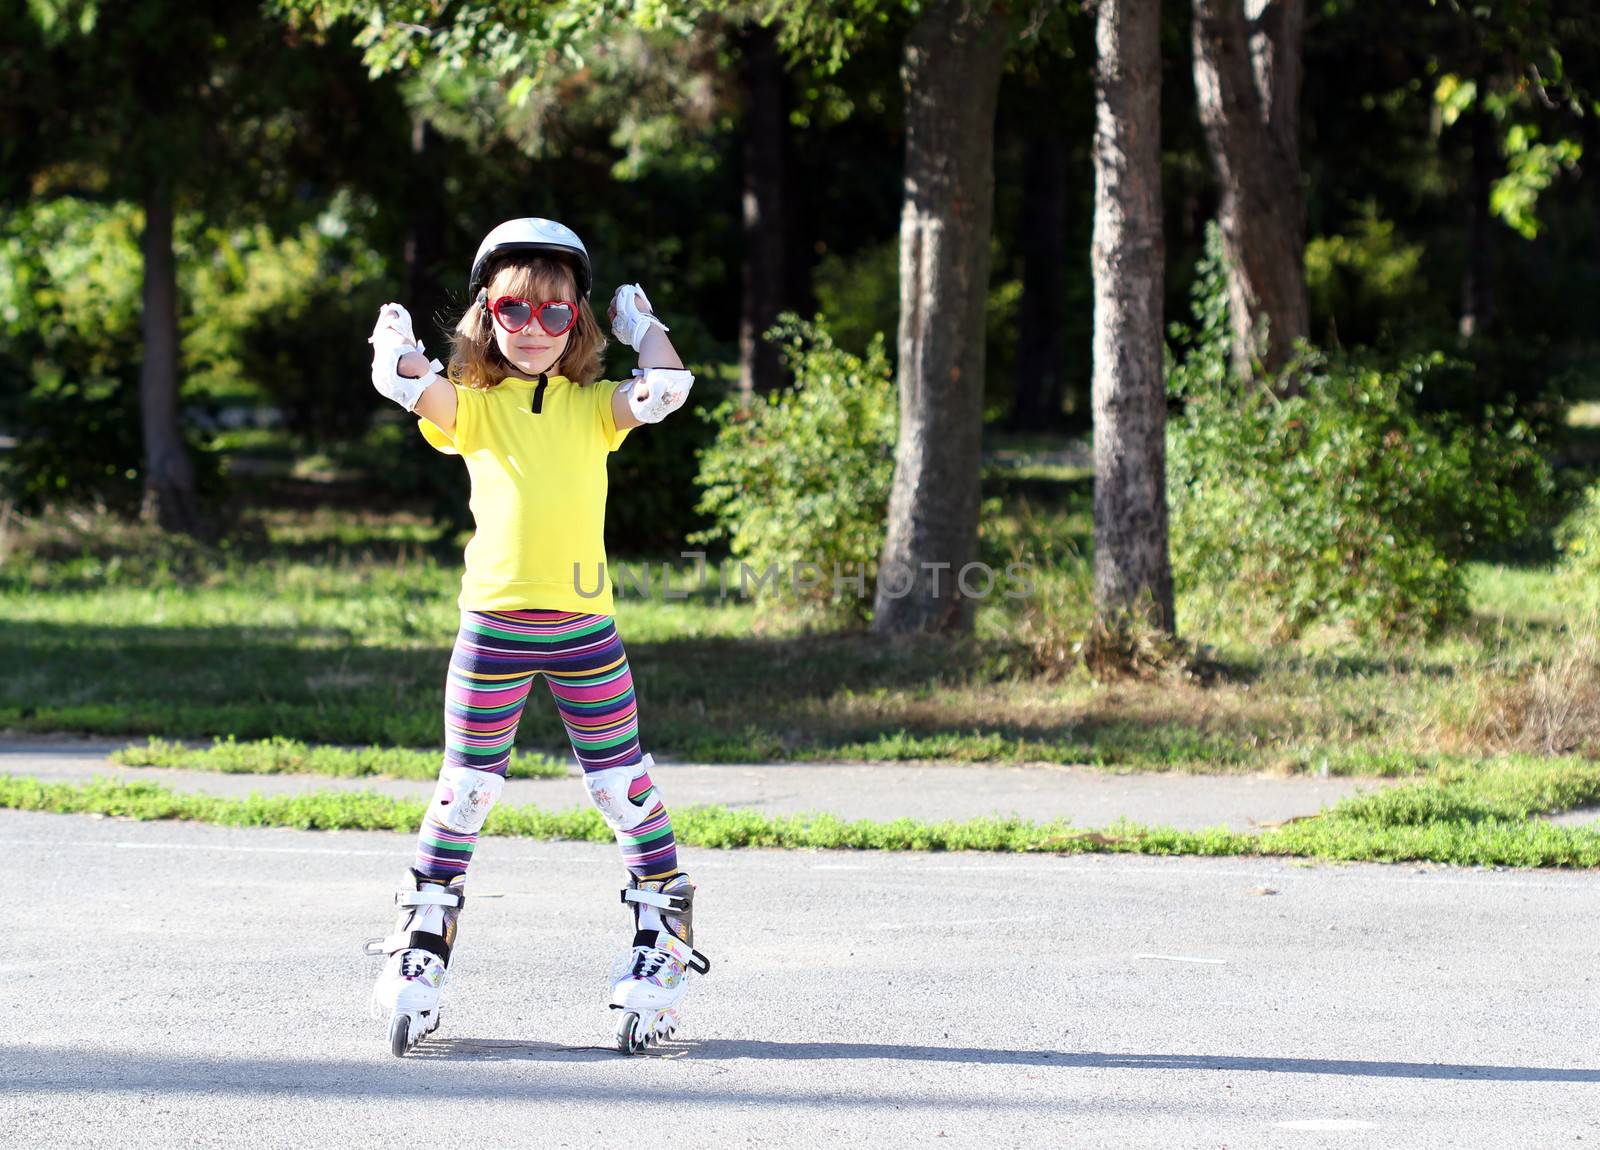 Roller skating happy little girl with protective gear by goce